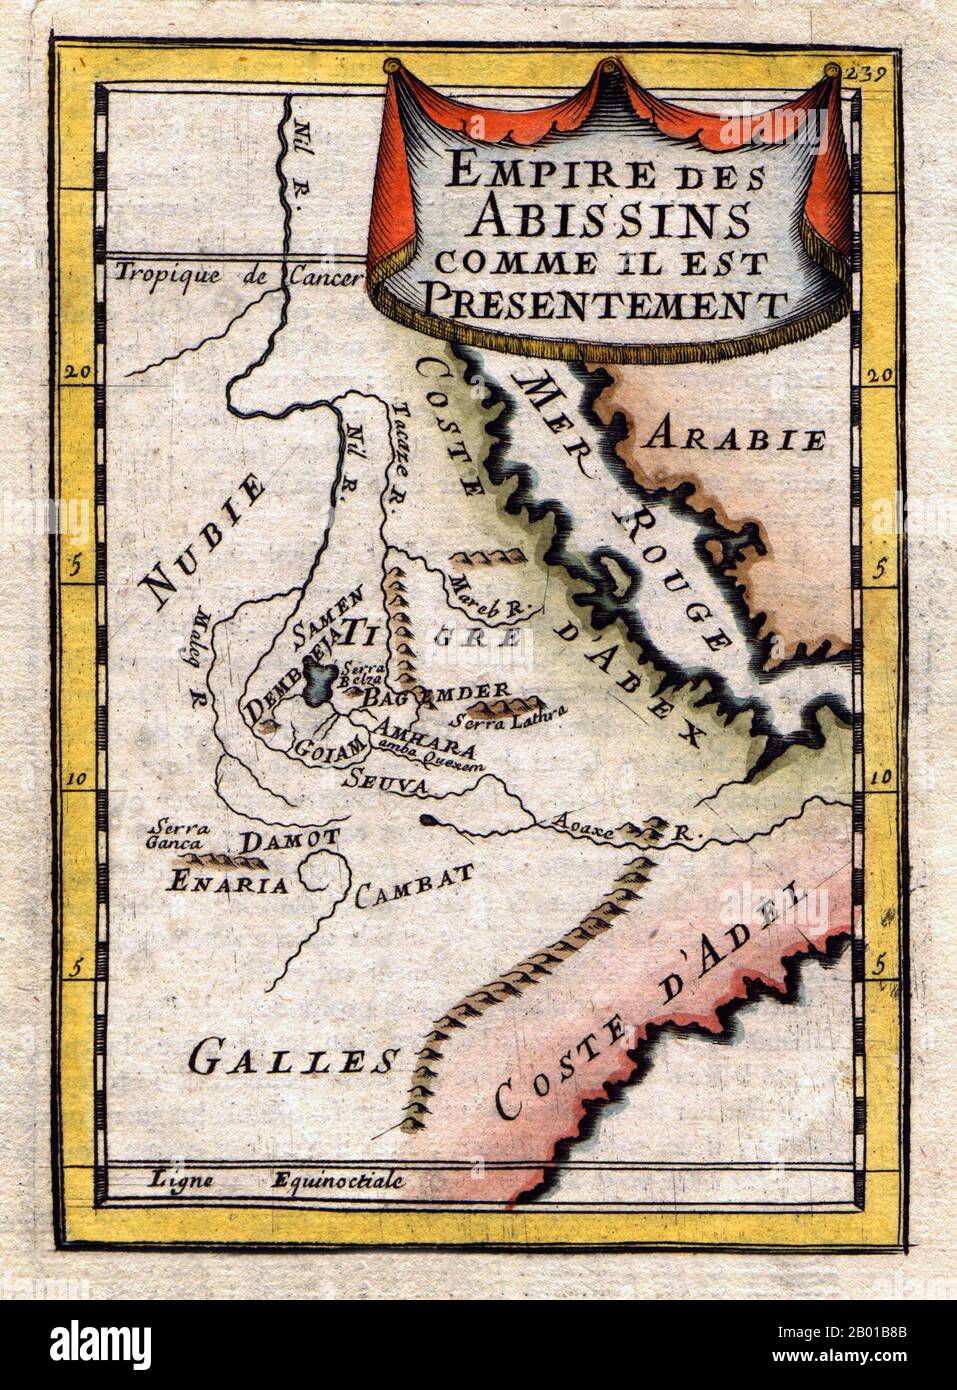 Ethiopia/Eritrea: Map of the Abyssinian Empire, by Alain Manesson Mallet (1630-1706), 1683.  A French map of the Red Sea and East African Coast dated 1683 and the Ethiopian/Abyssinian Empire, which historically spanned modern-day Ethiopia and Eritrea from 1270 until the 1974 coup d'etat that ended the empire. Stock Photo